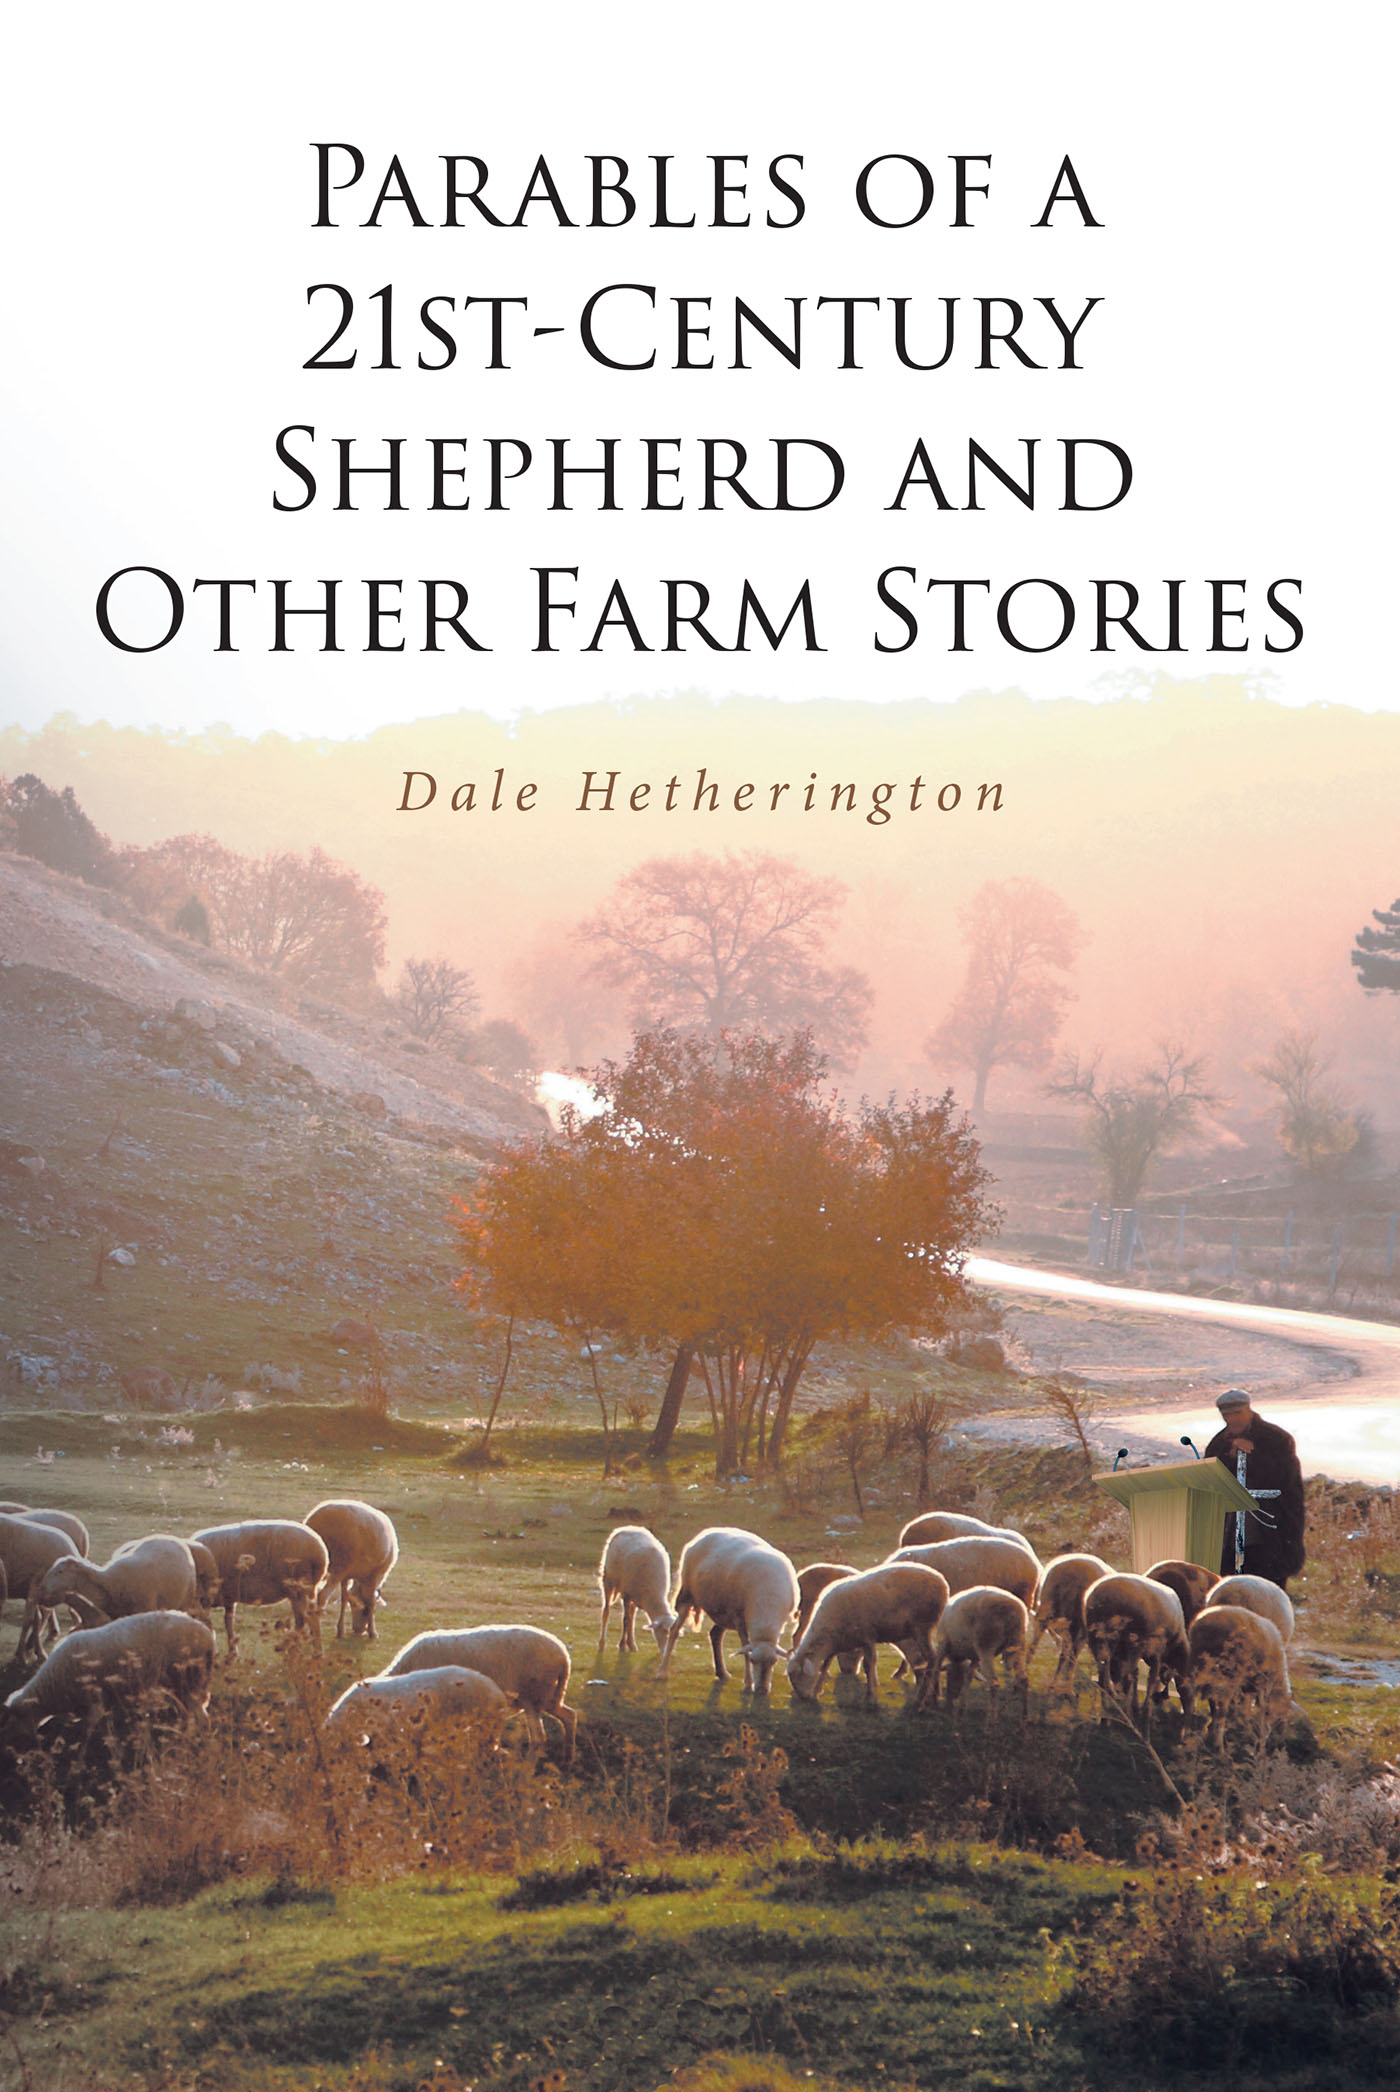 Dale Hetherington’s Newly Released "Parables of a 21st-Century Shepherd and Other Farm Stories" is an Enjoyable Collection of Inspiring Messages